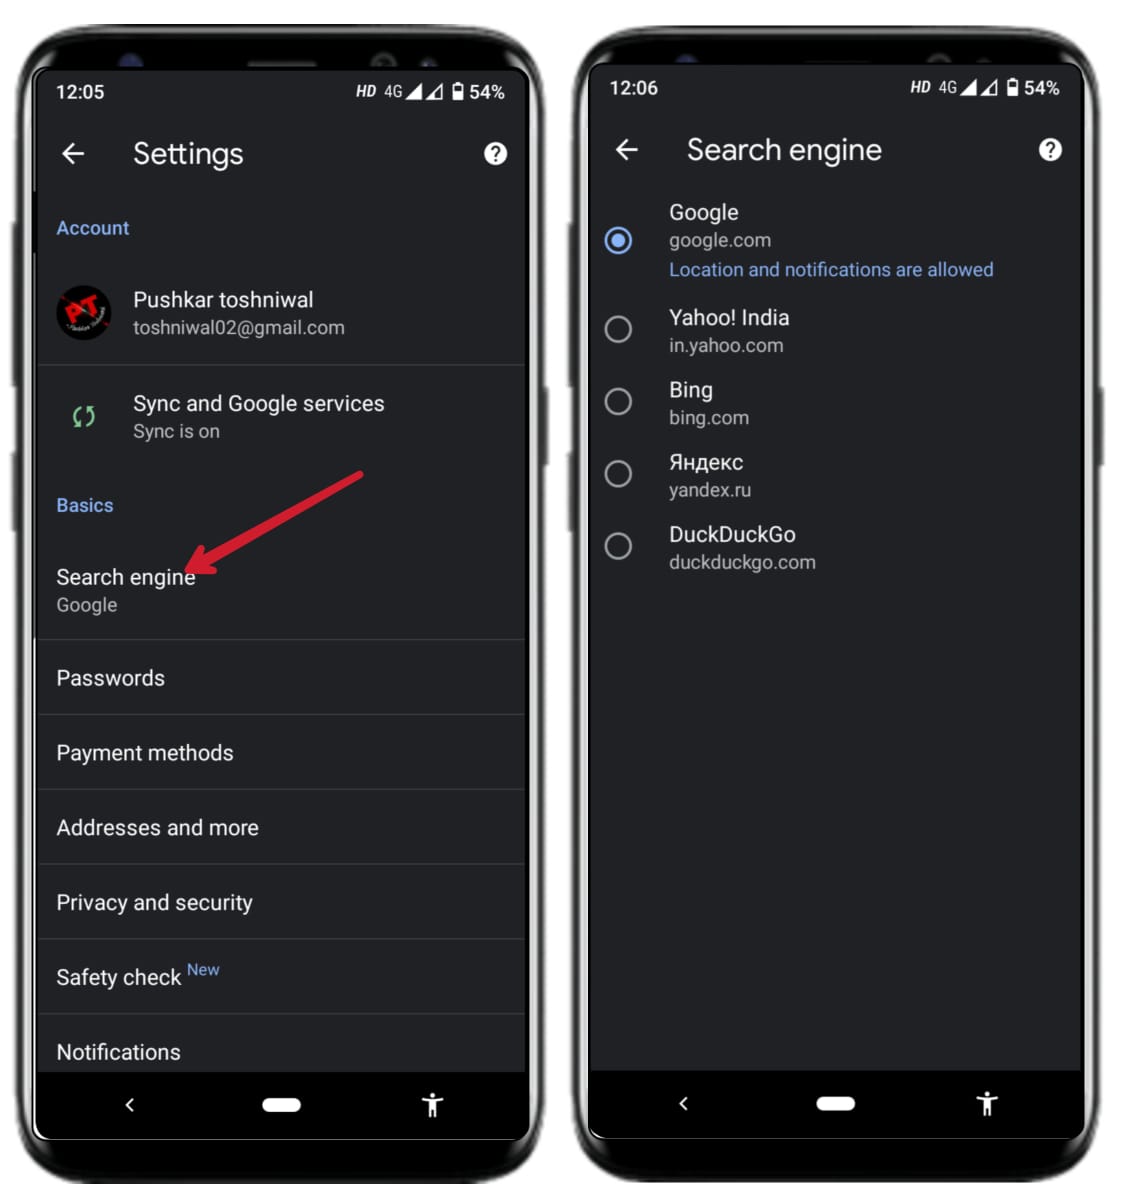 Android chrome- Tips and tricks 2021